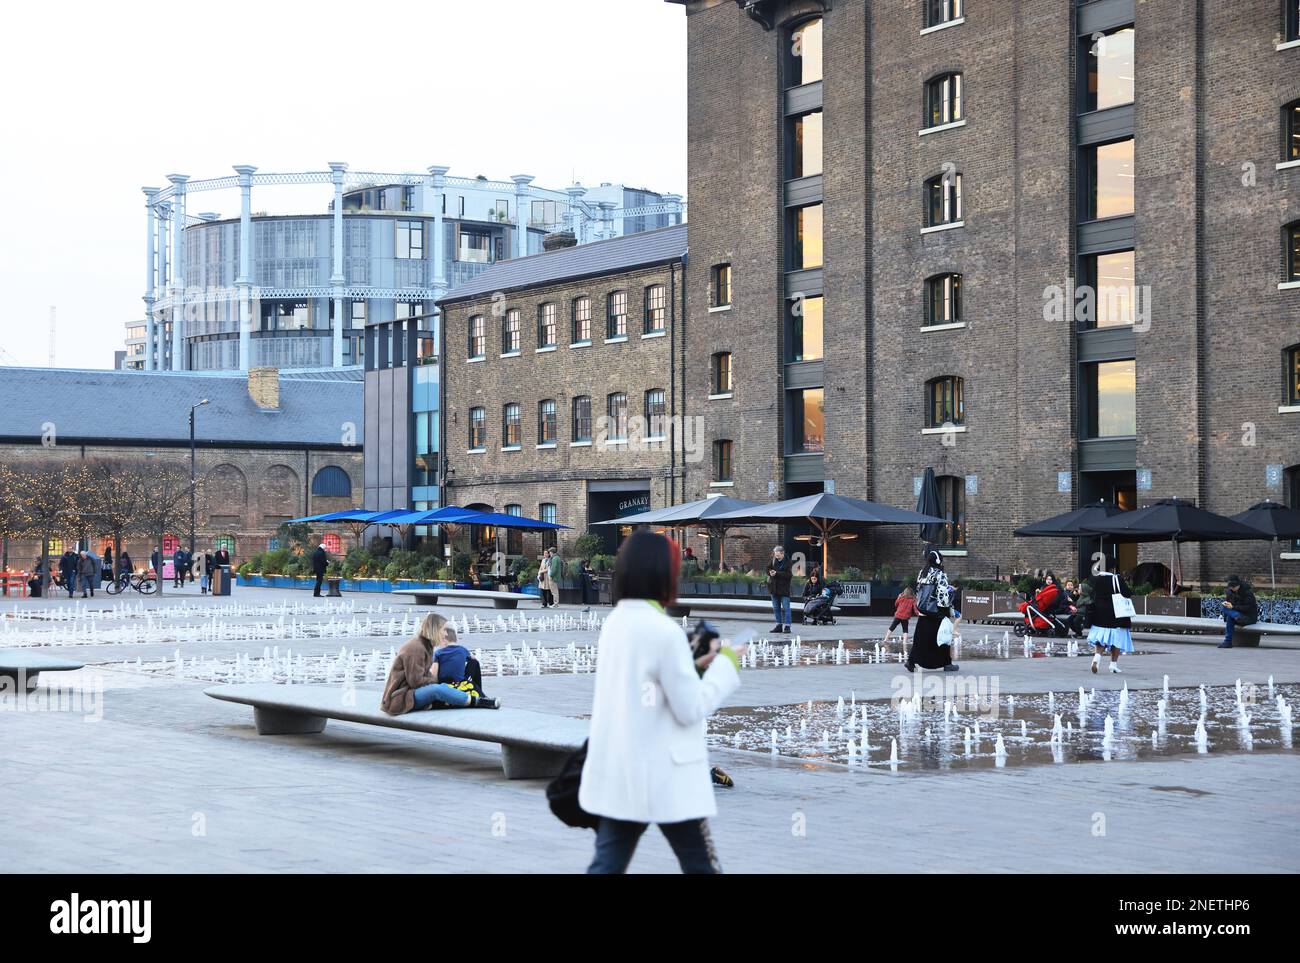 Winter sunshine on St Martins Central School of Art and the Granary Square fountains, at Kings Cross, north London, UK Stock Photo